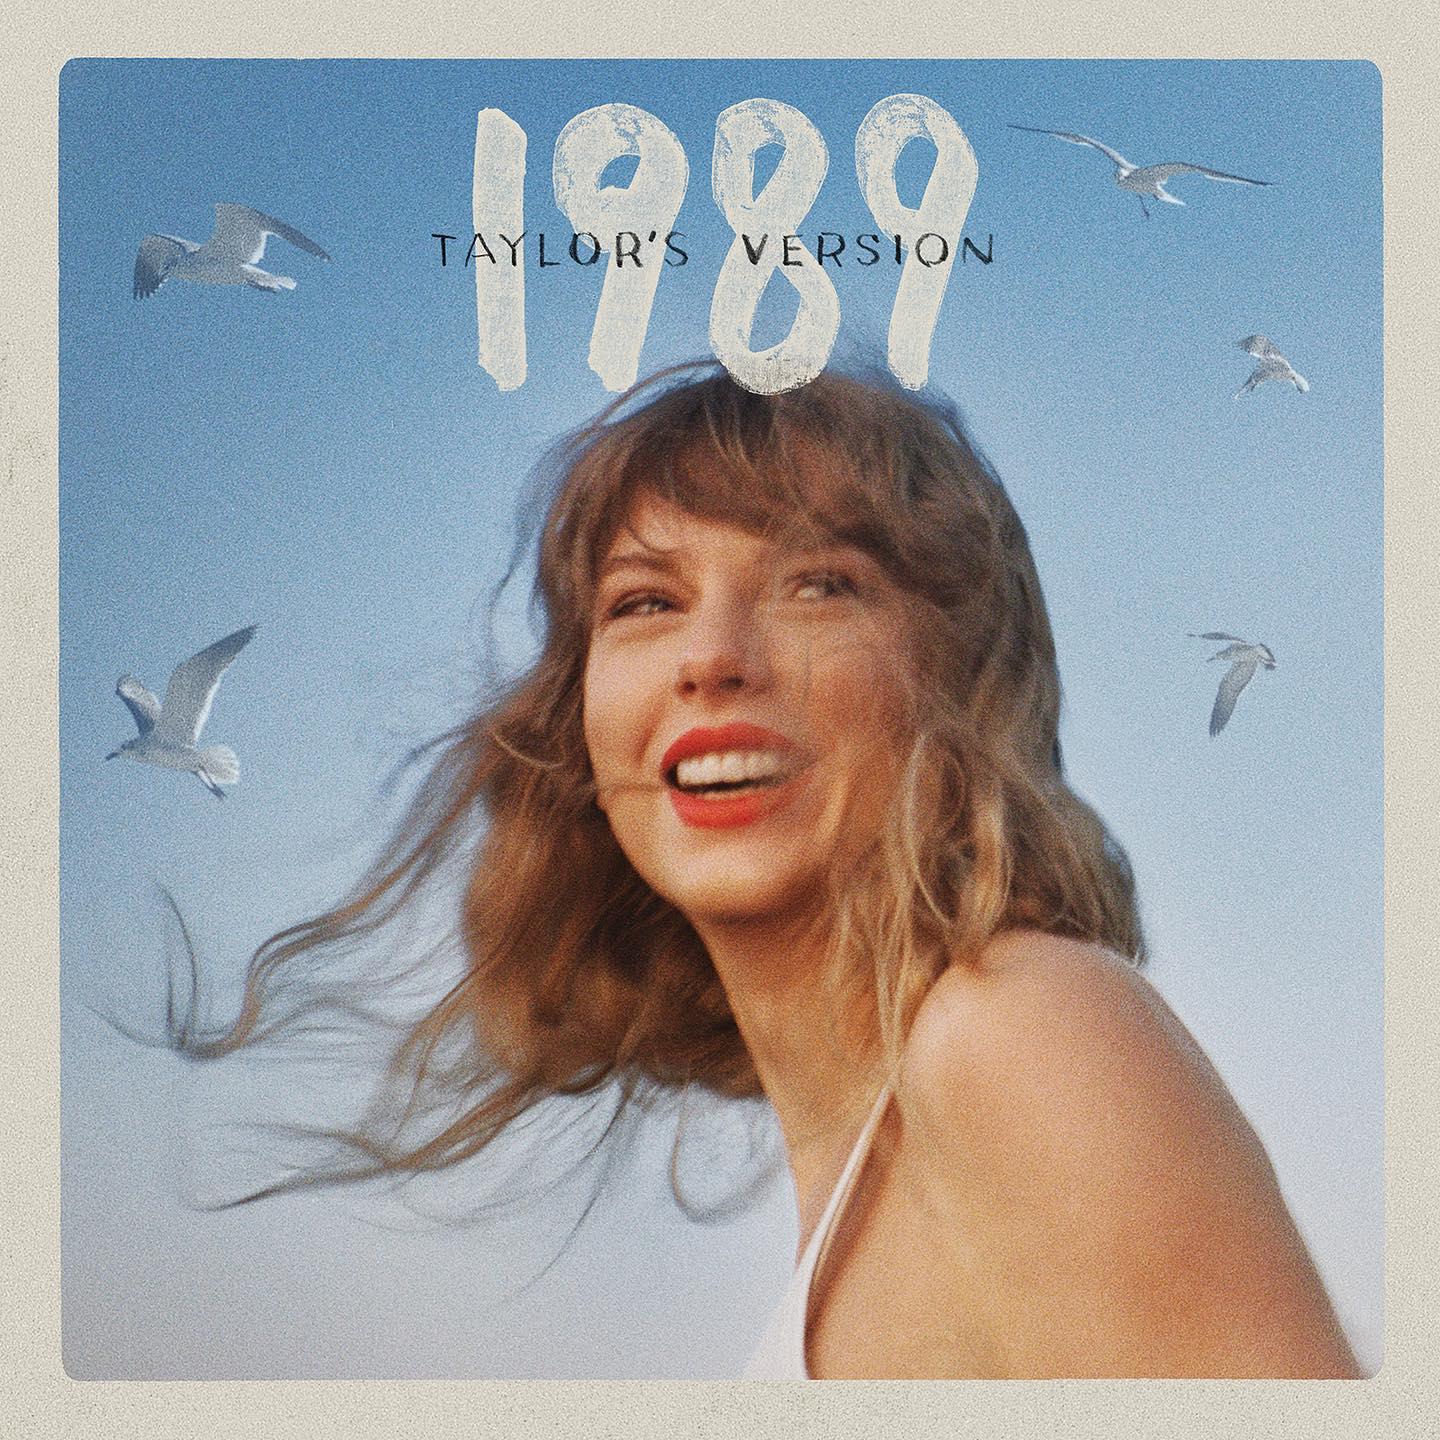 Taylor Swift teases 1989 TV release